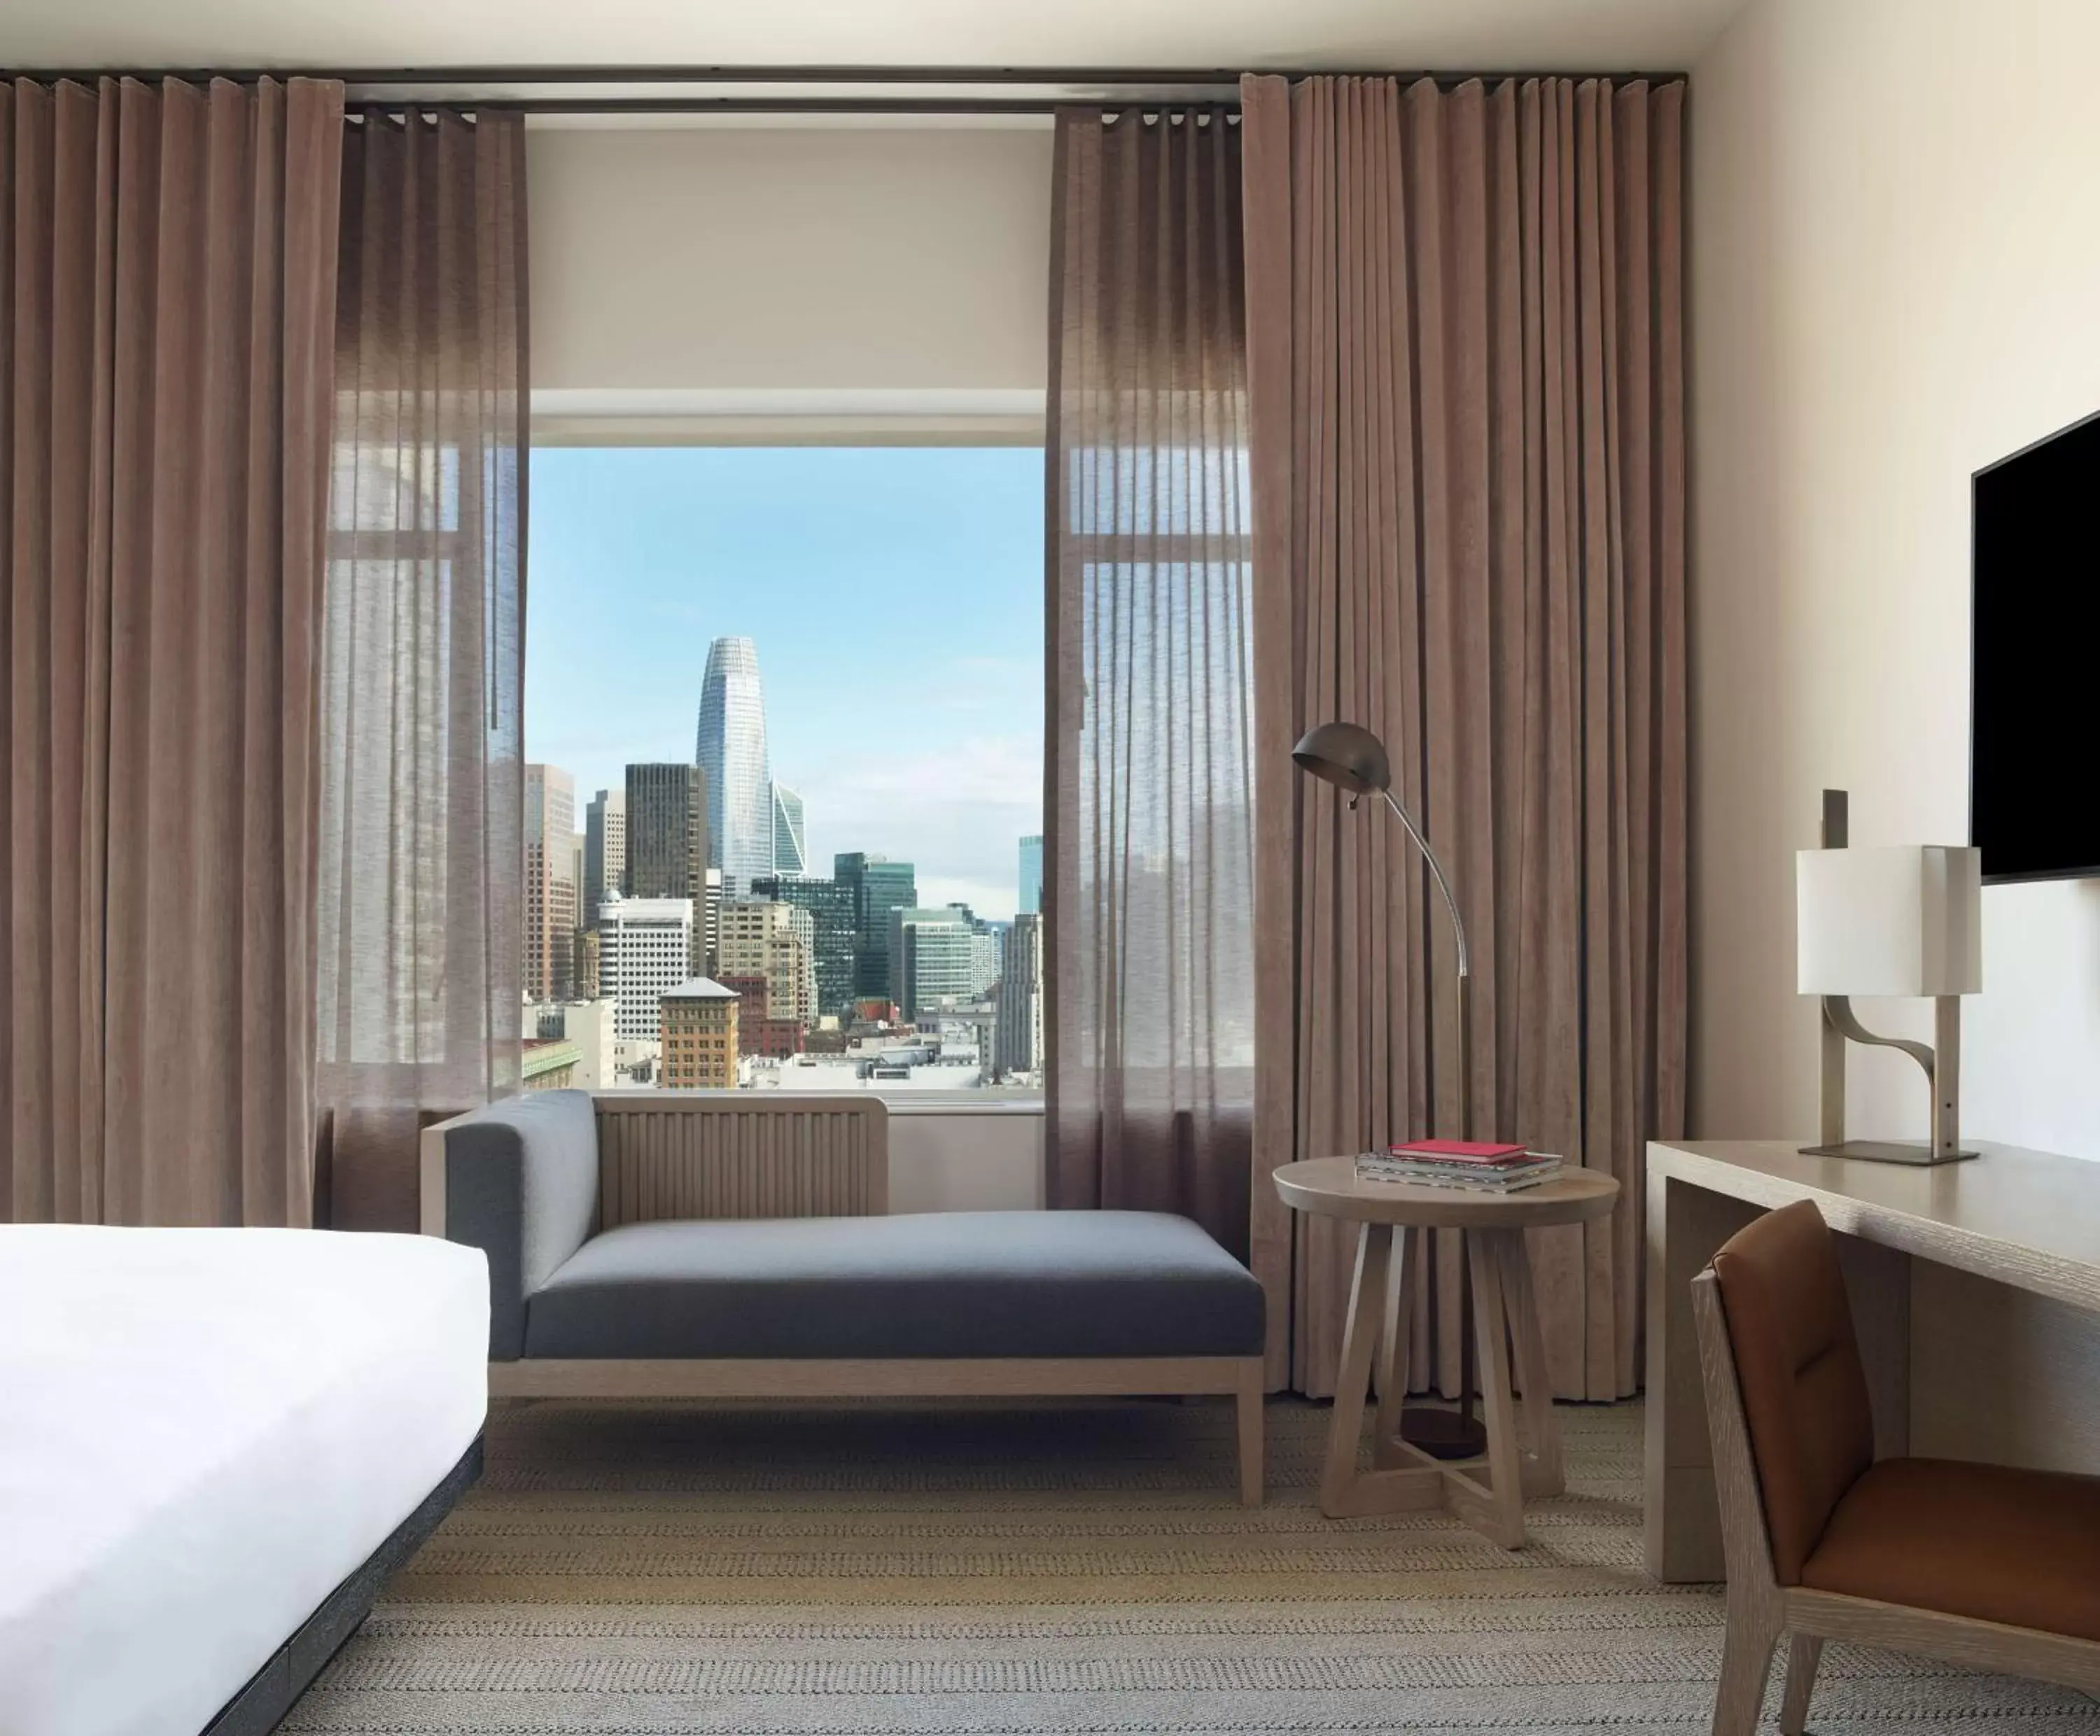 View (from property/room) in The Clift Royal Sonesta San Francisco